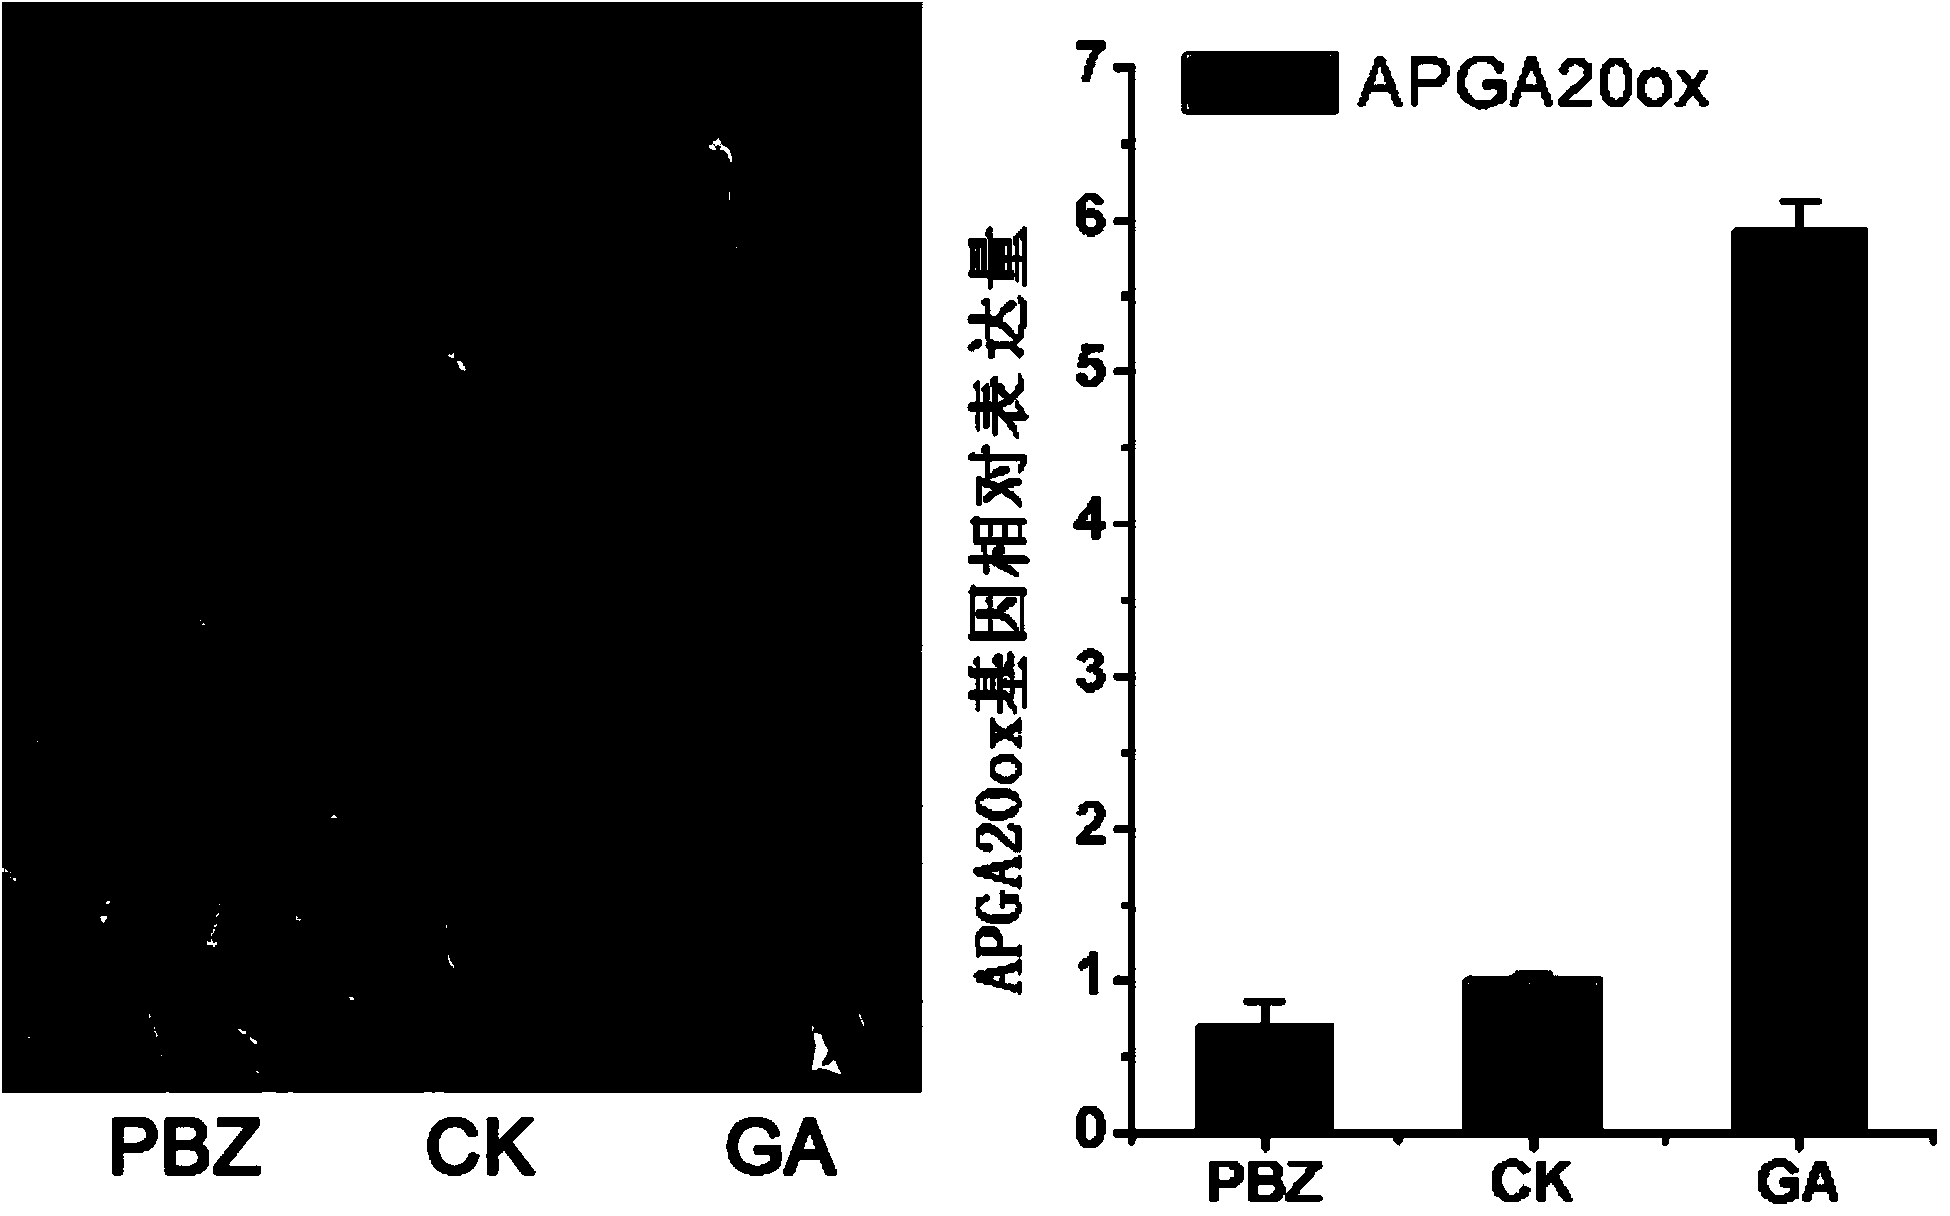 Agapanthus praecox gibberellin synthesis dioxygenase APGA20ox protein, and coding gene and probe thereof